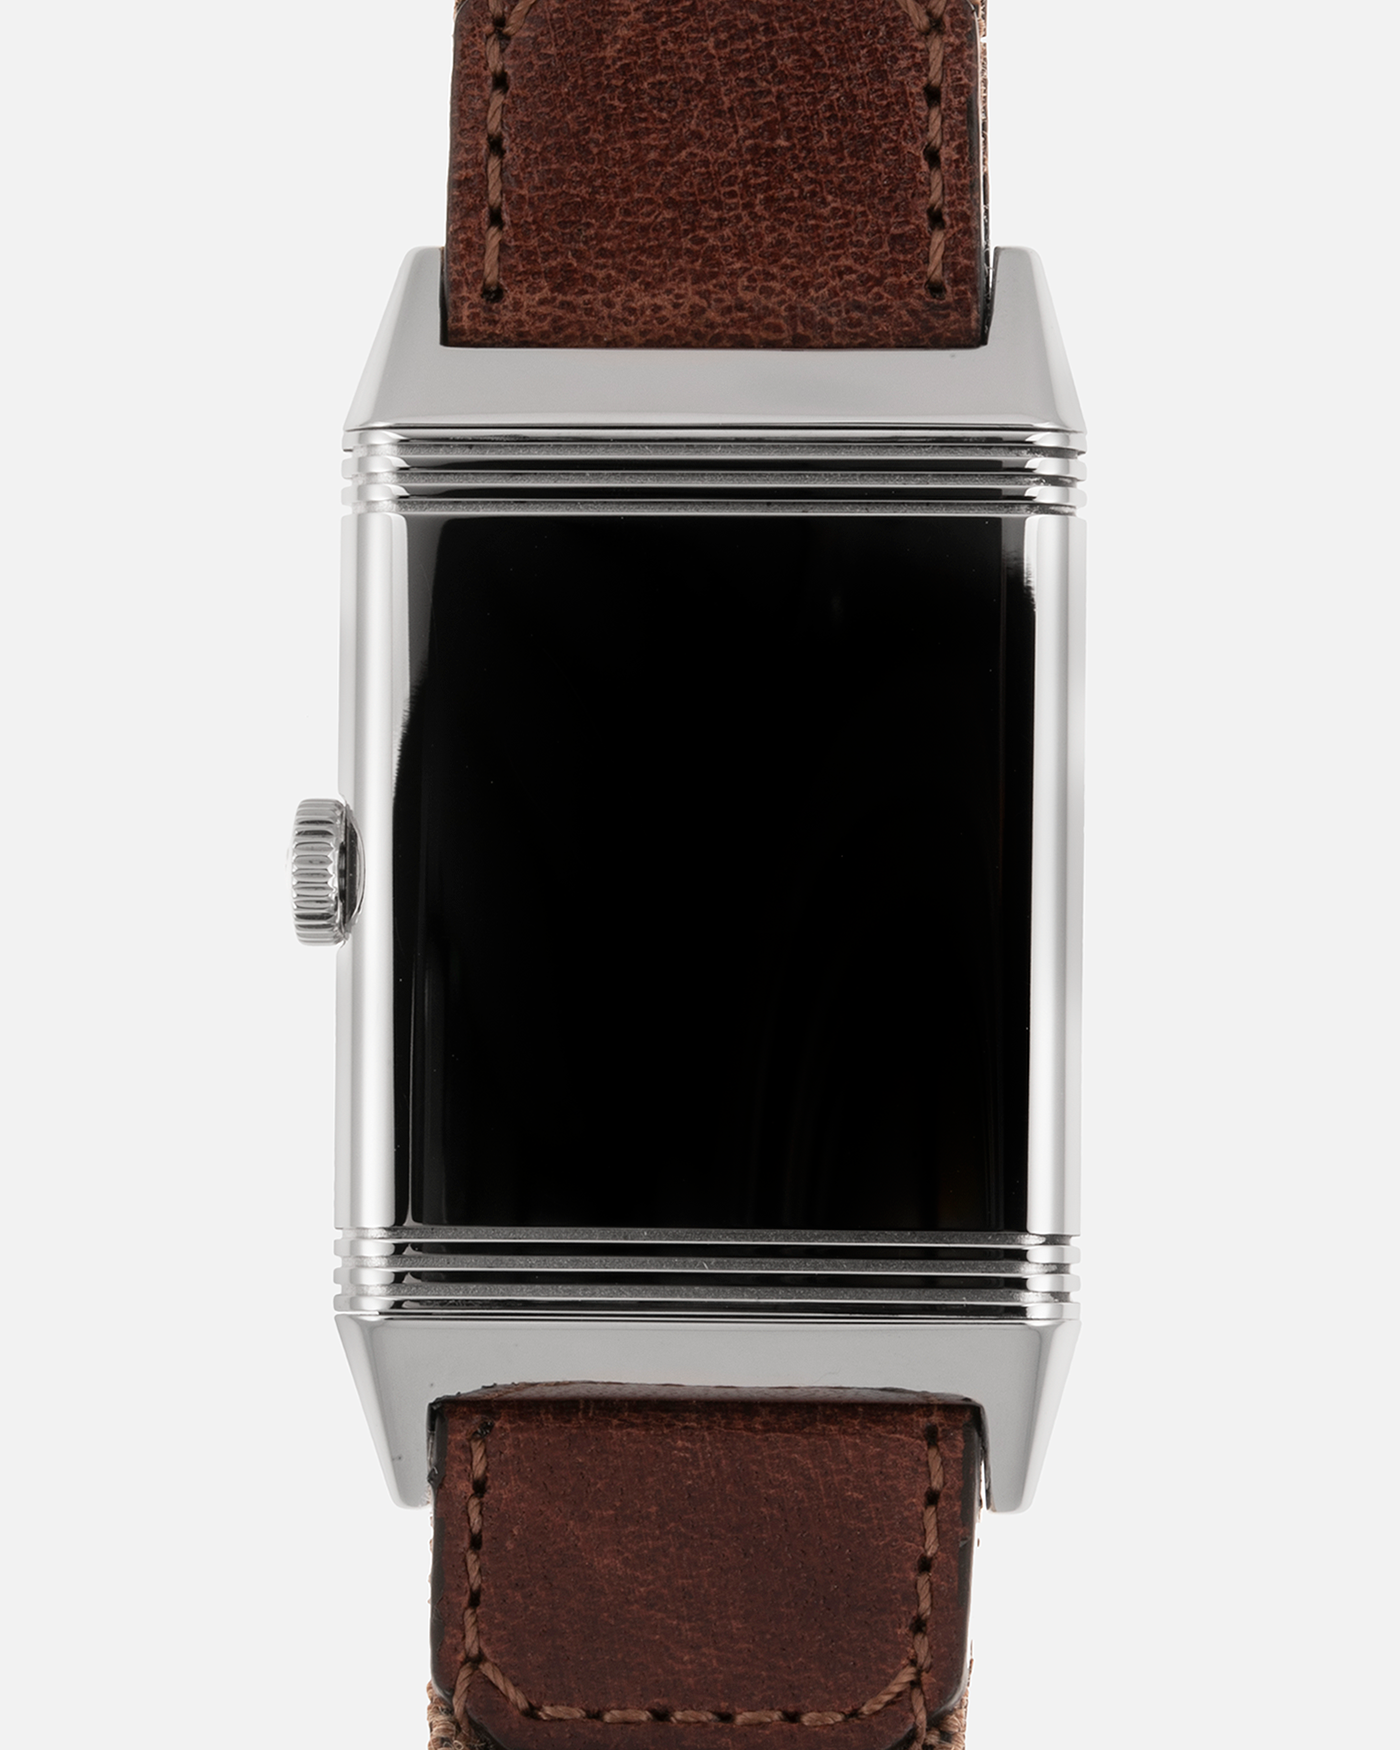 Brand: Jaeger LeCoultre Year: 2011 Model: Grande Reverso Ultra Thin Edizione Speciale Italica Ref 277.8.62 Material: Stainless Steel Movement: JLC Cal. 822, Manual-Wind Case Diameter: 46mm x 27mm Bracelet/Strap: Jaeger LeCoultre Case Fagliomo Brown Canvas Strap with Signed Tang Buckle